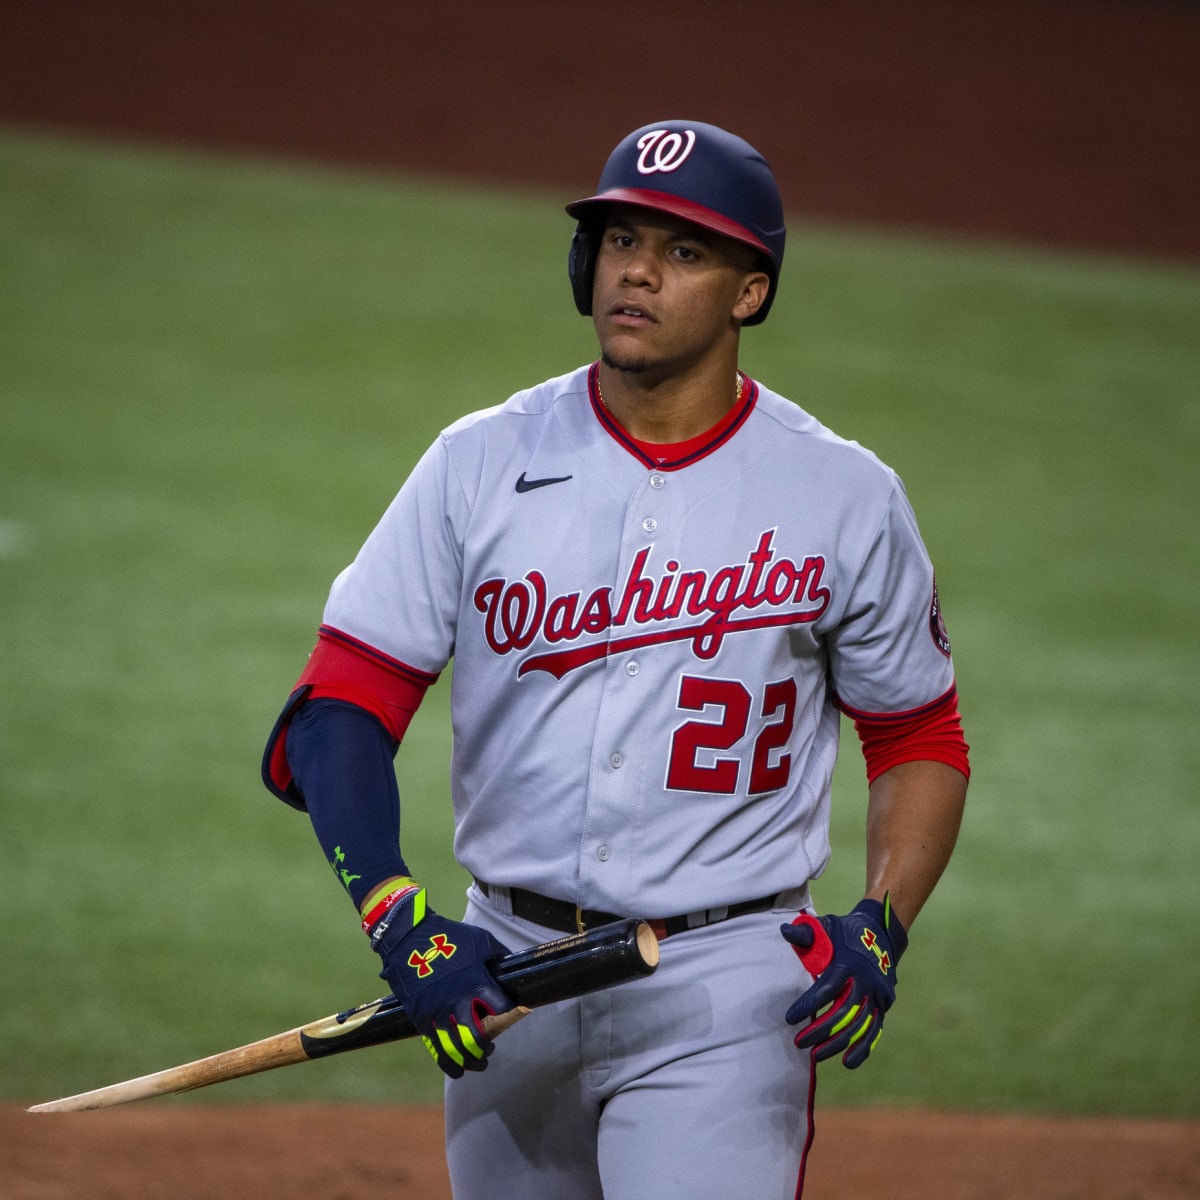 Juan Soto of the Washington Nationals reacts after striking out